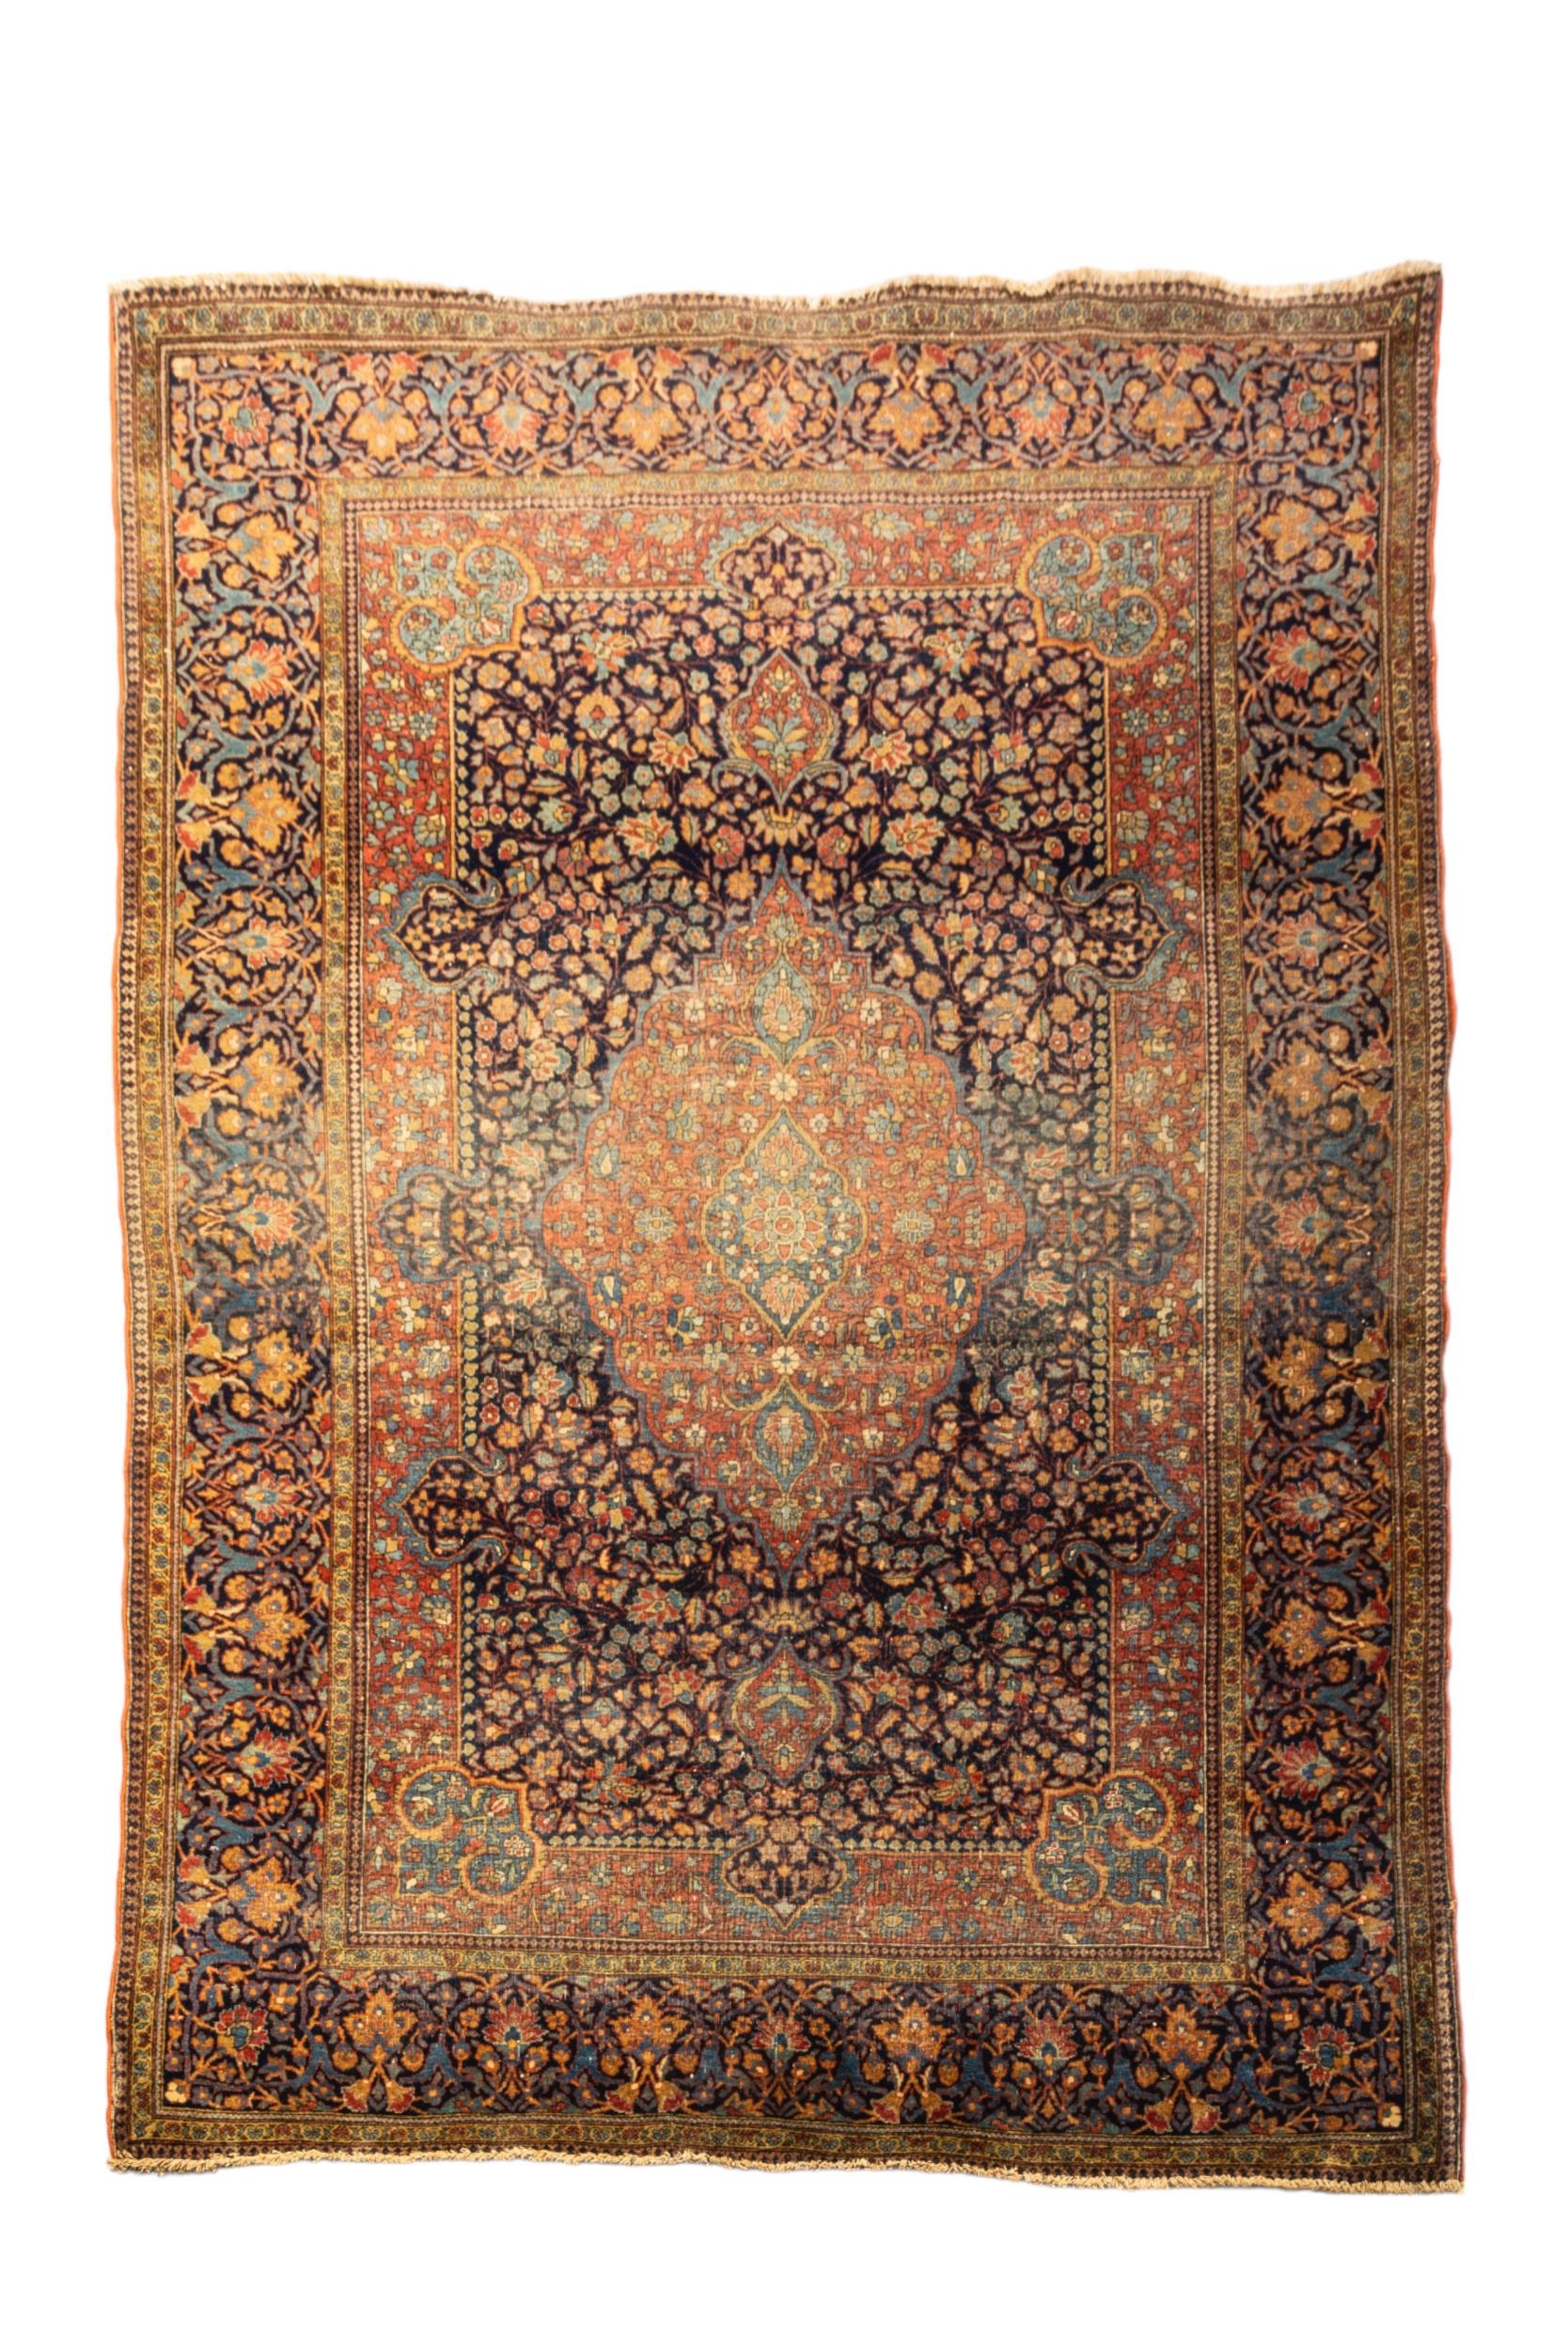 A VERY FINE HAND KNOTTED WOOL TABRIZ RUG, LATE 19TH/EARLY 20TH CENTURY, fair condition  195 x 130 cm